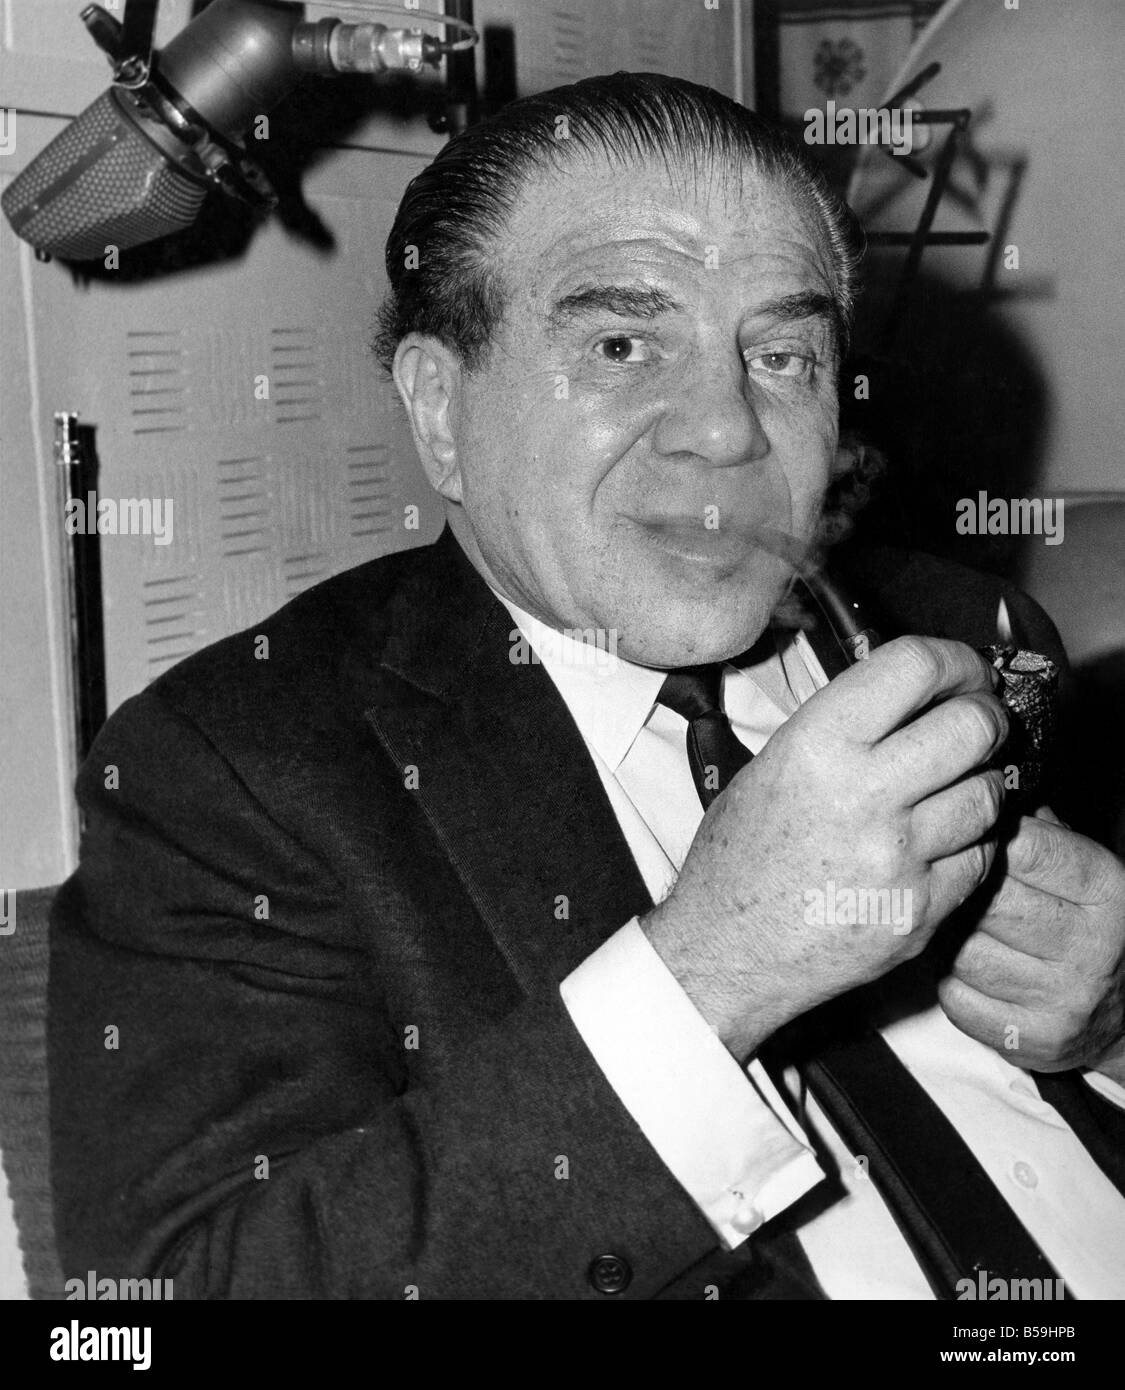 Actor Lionel Stander in London. March 1965 P008091 Stock Photo